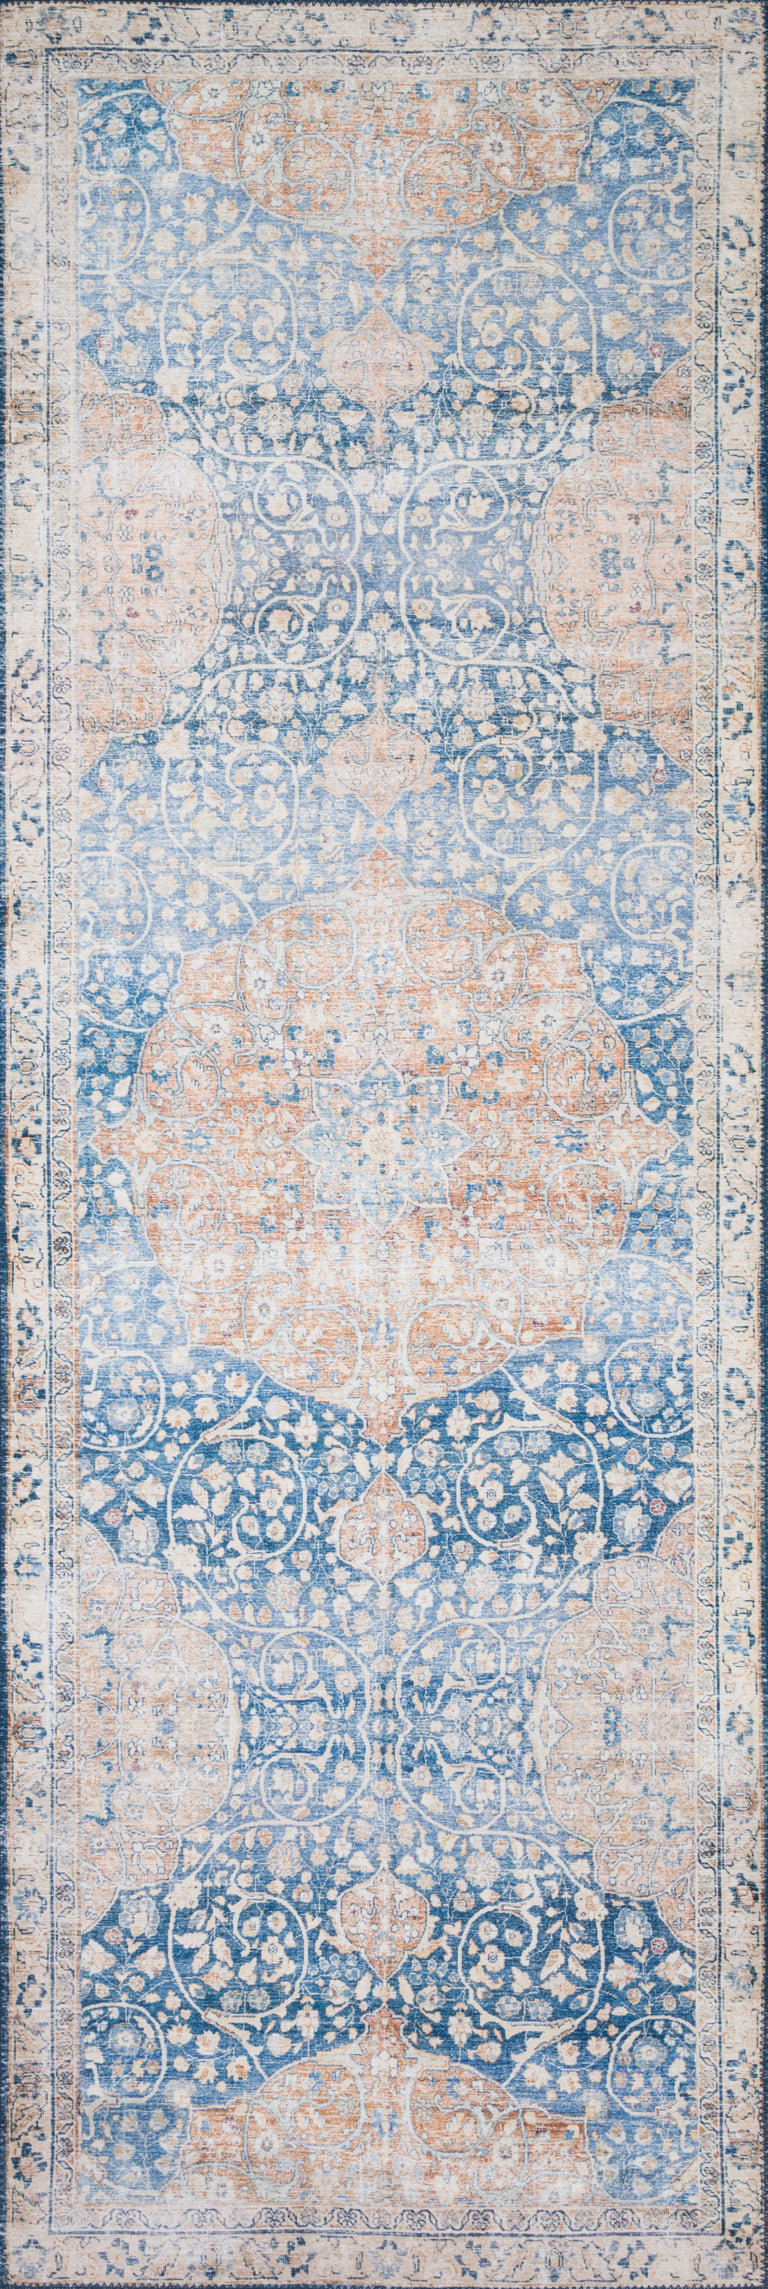 Loloi II Layla Collection Rug in Blue, Tangerine - 2'3" x 3'9"